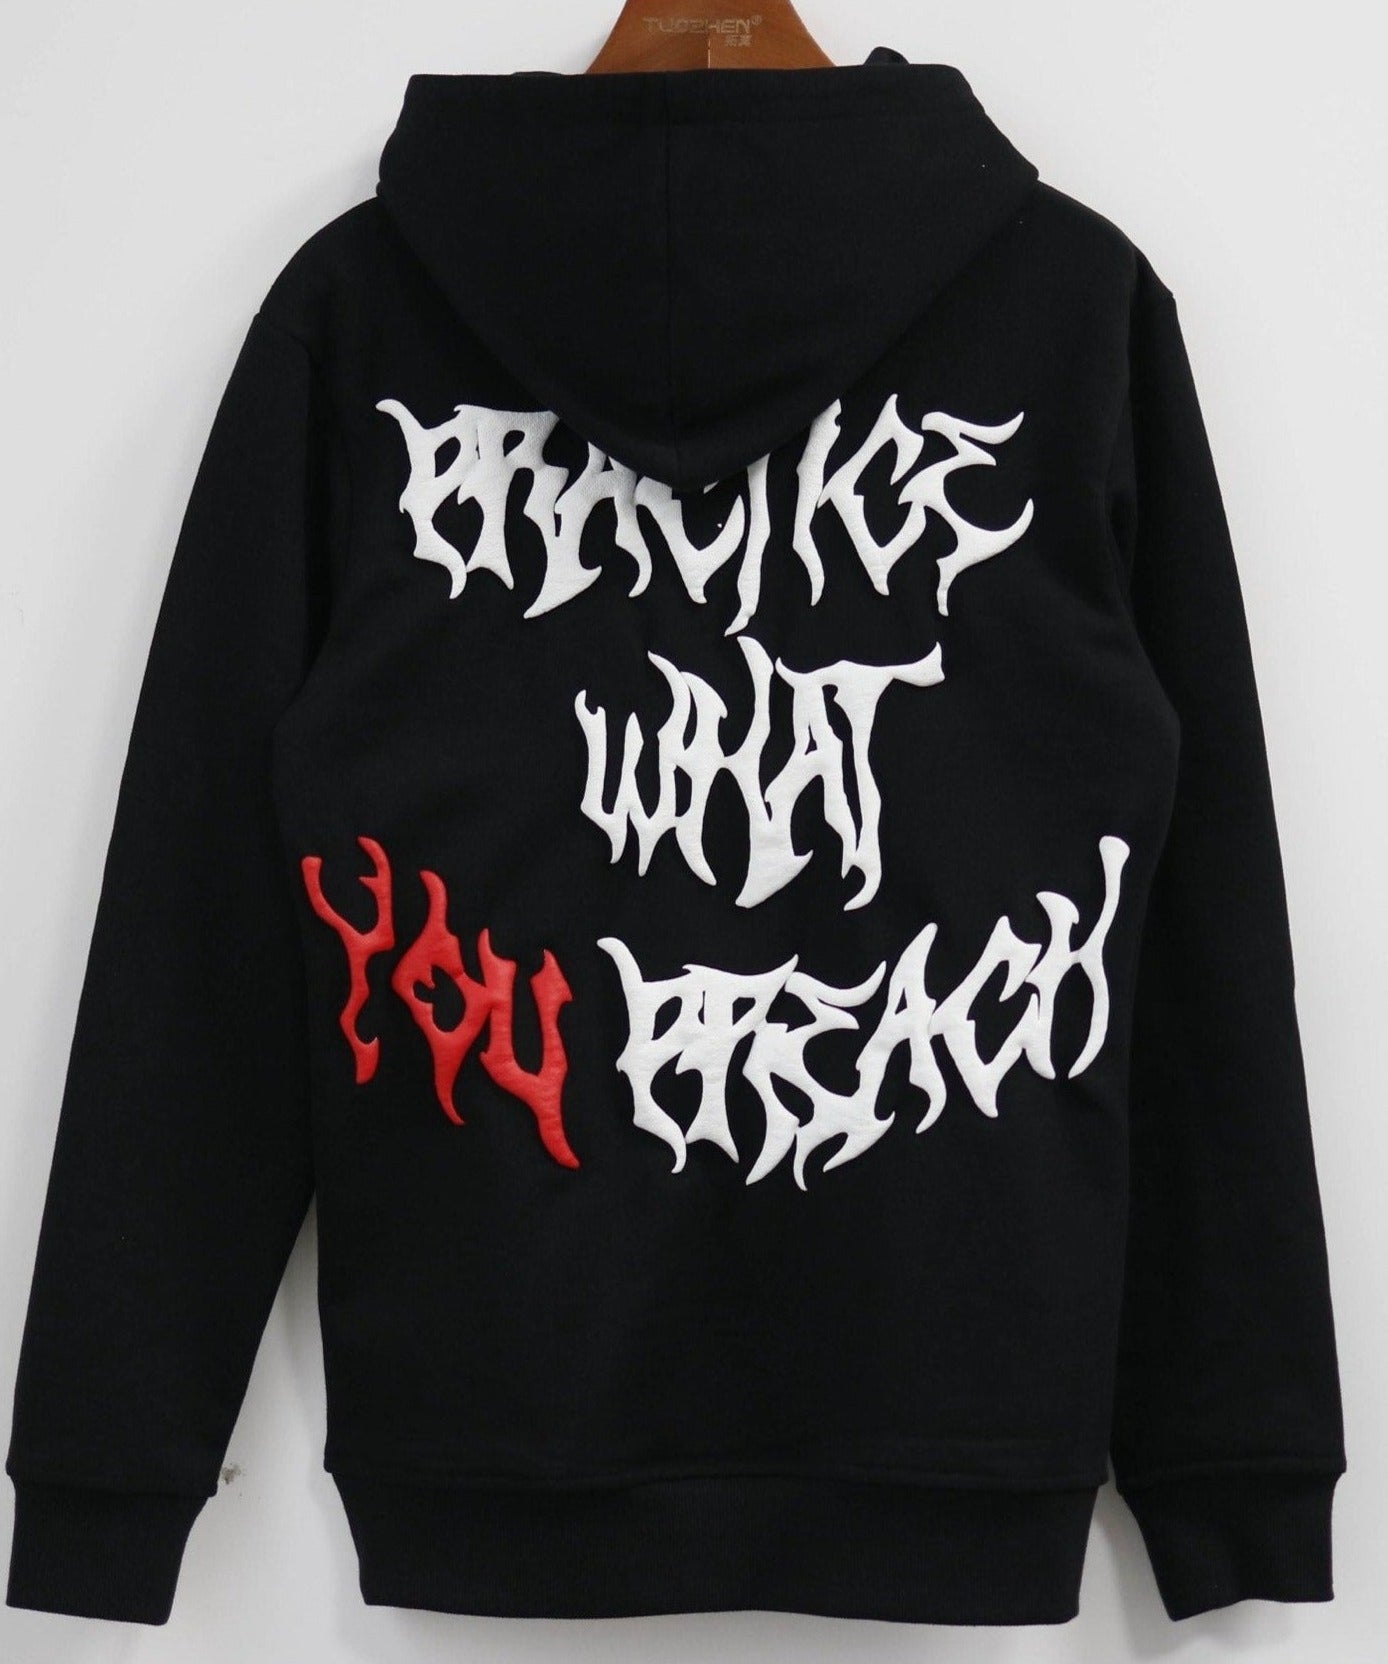 "Practice What You Preach" Hoodie